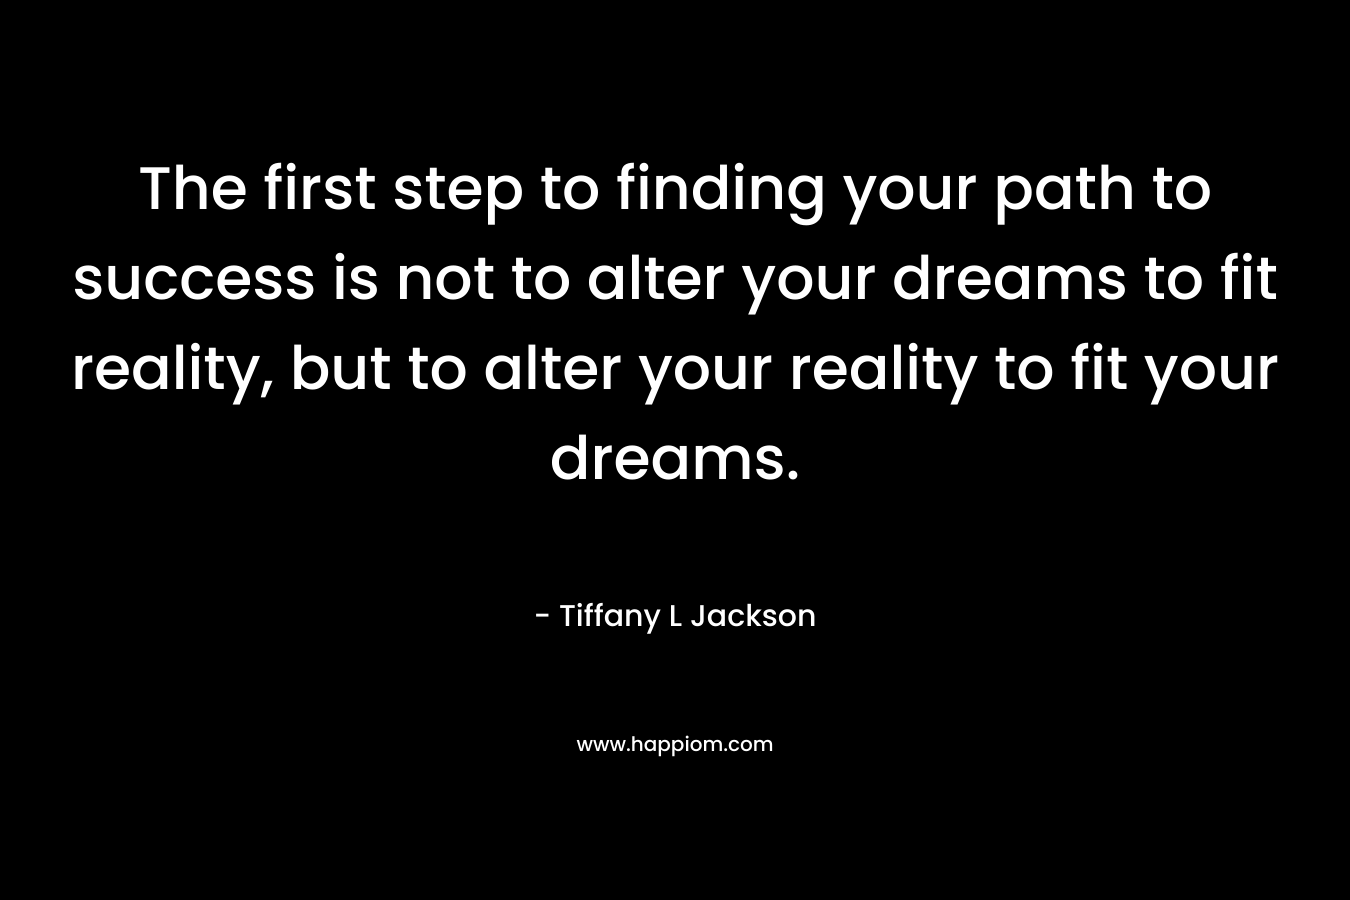 The first step to finding your path to success is not to alter your dreams to fit reality, but to alter your reality to fit your dreams.